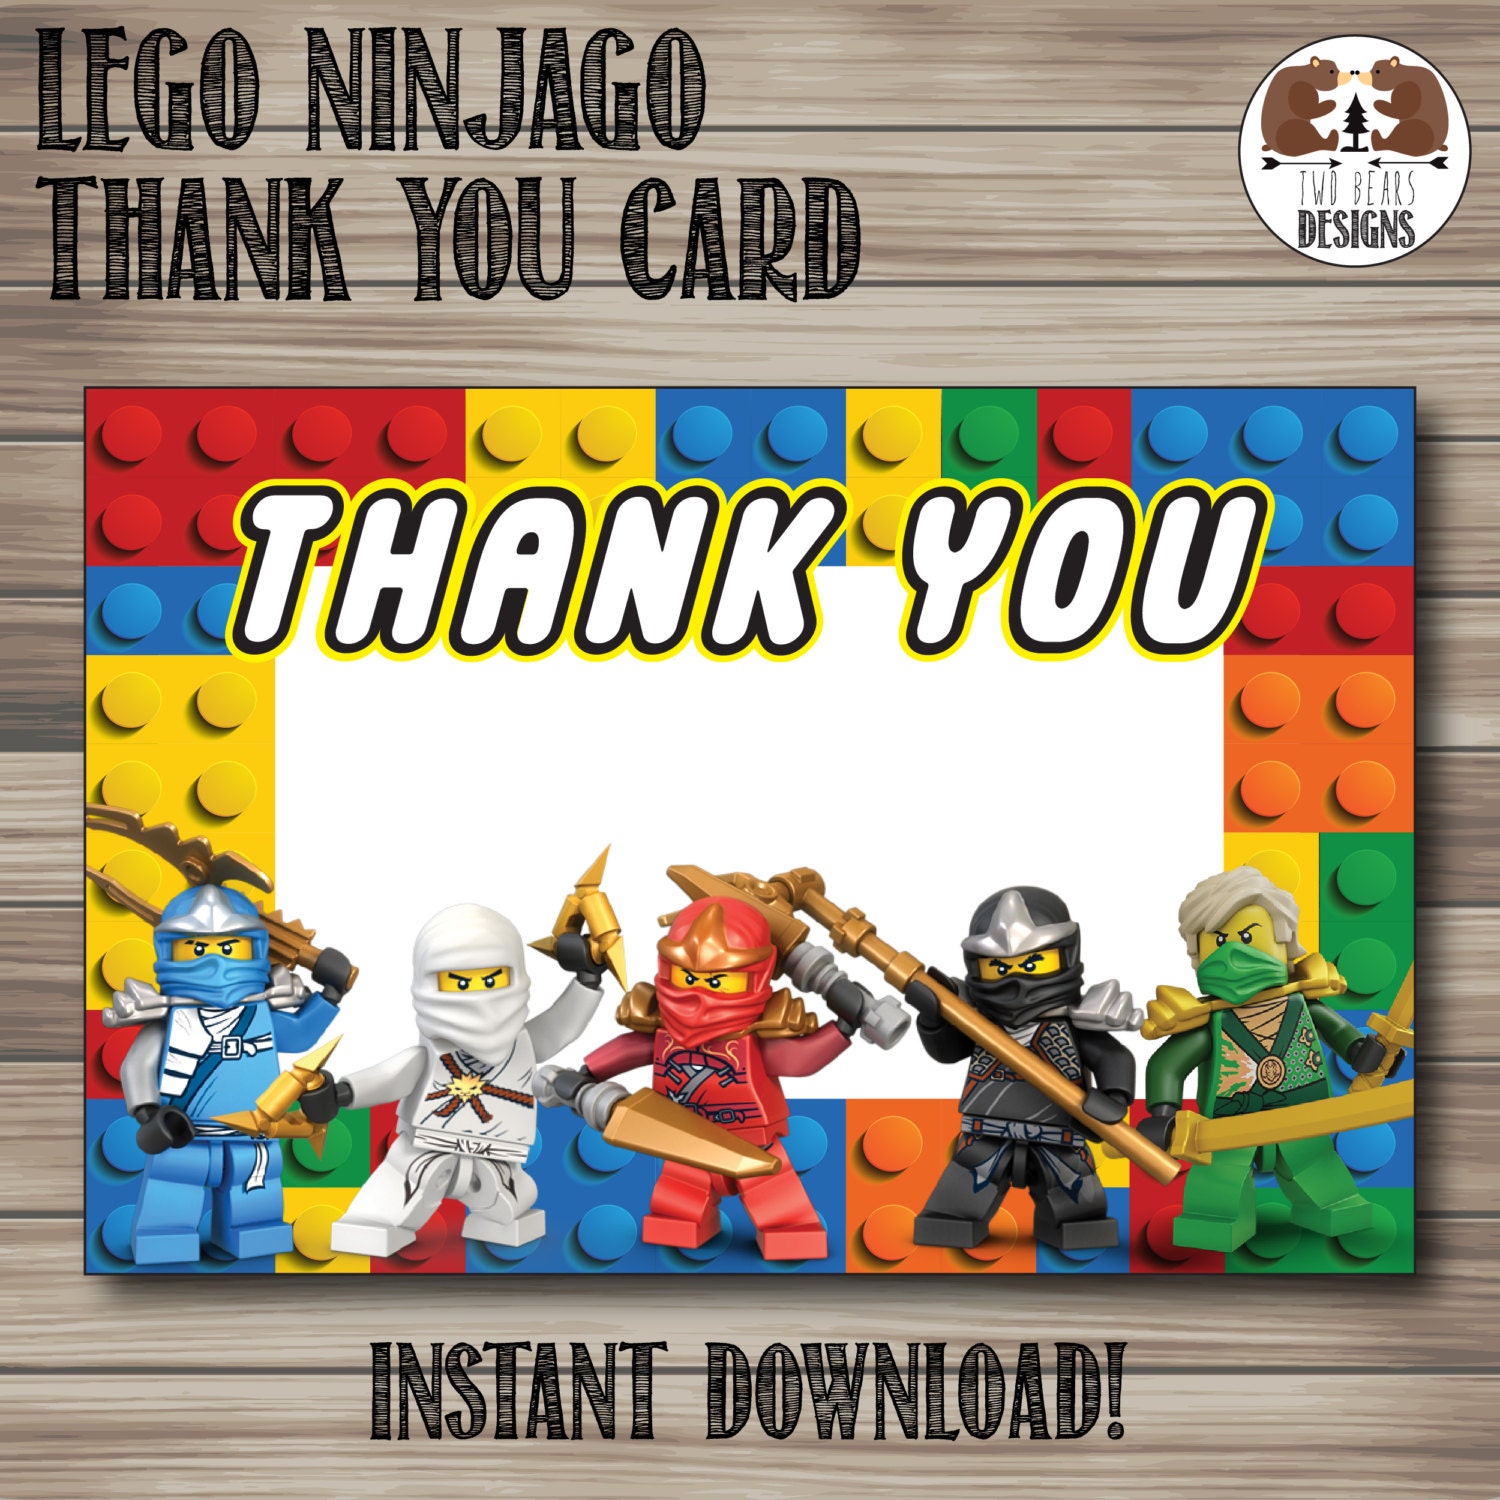 lego-ninjago-thank-you-card-instant-download-by-twobearsdesigns